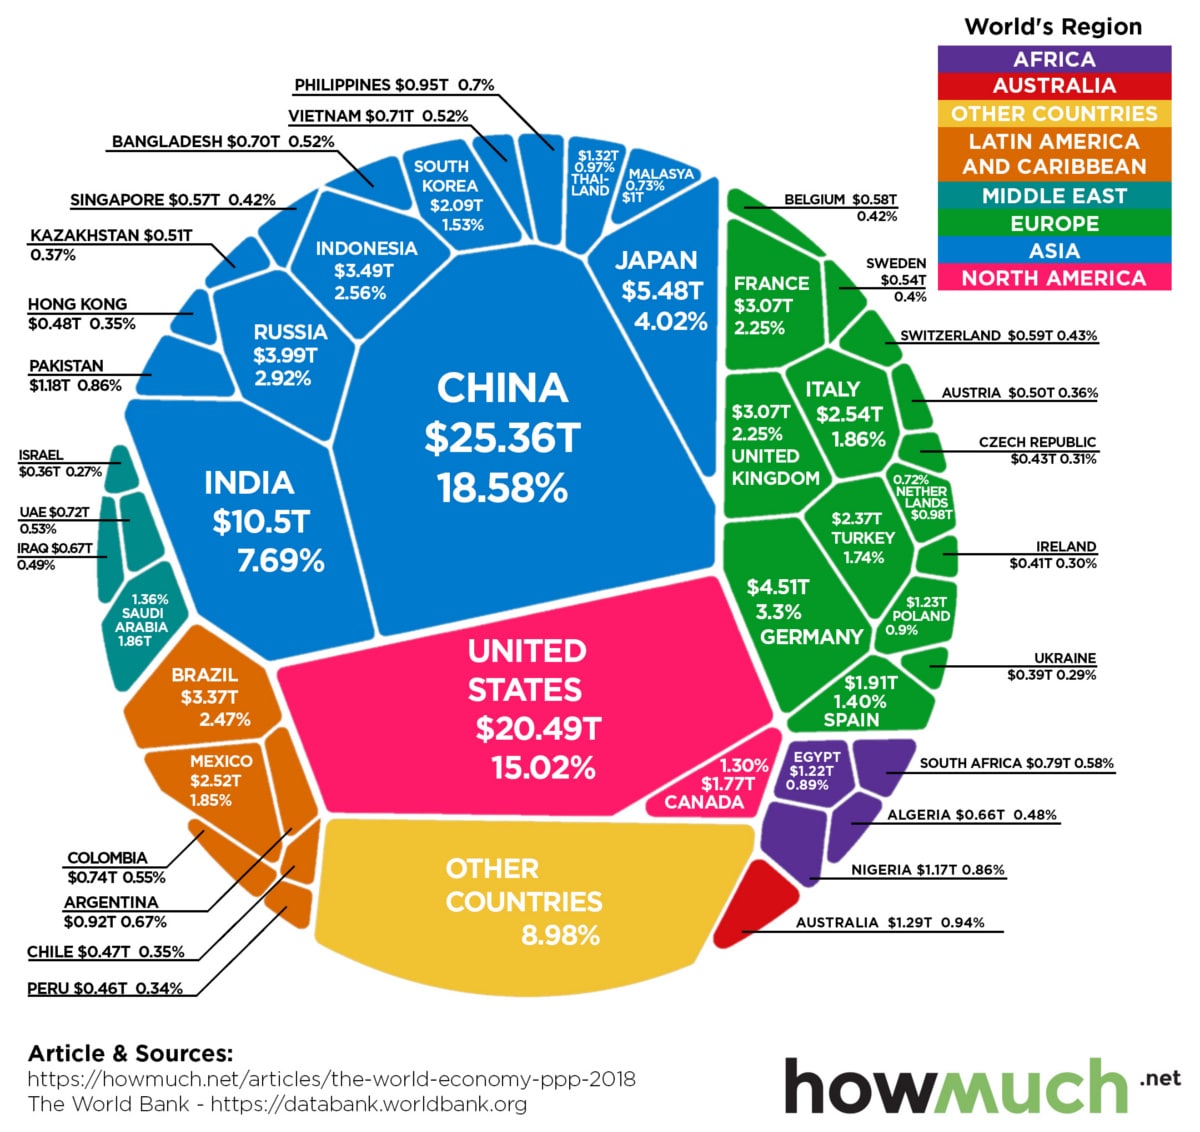 Visualizing the Composition of the World Economy by GDP (PPP)